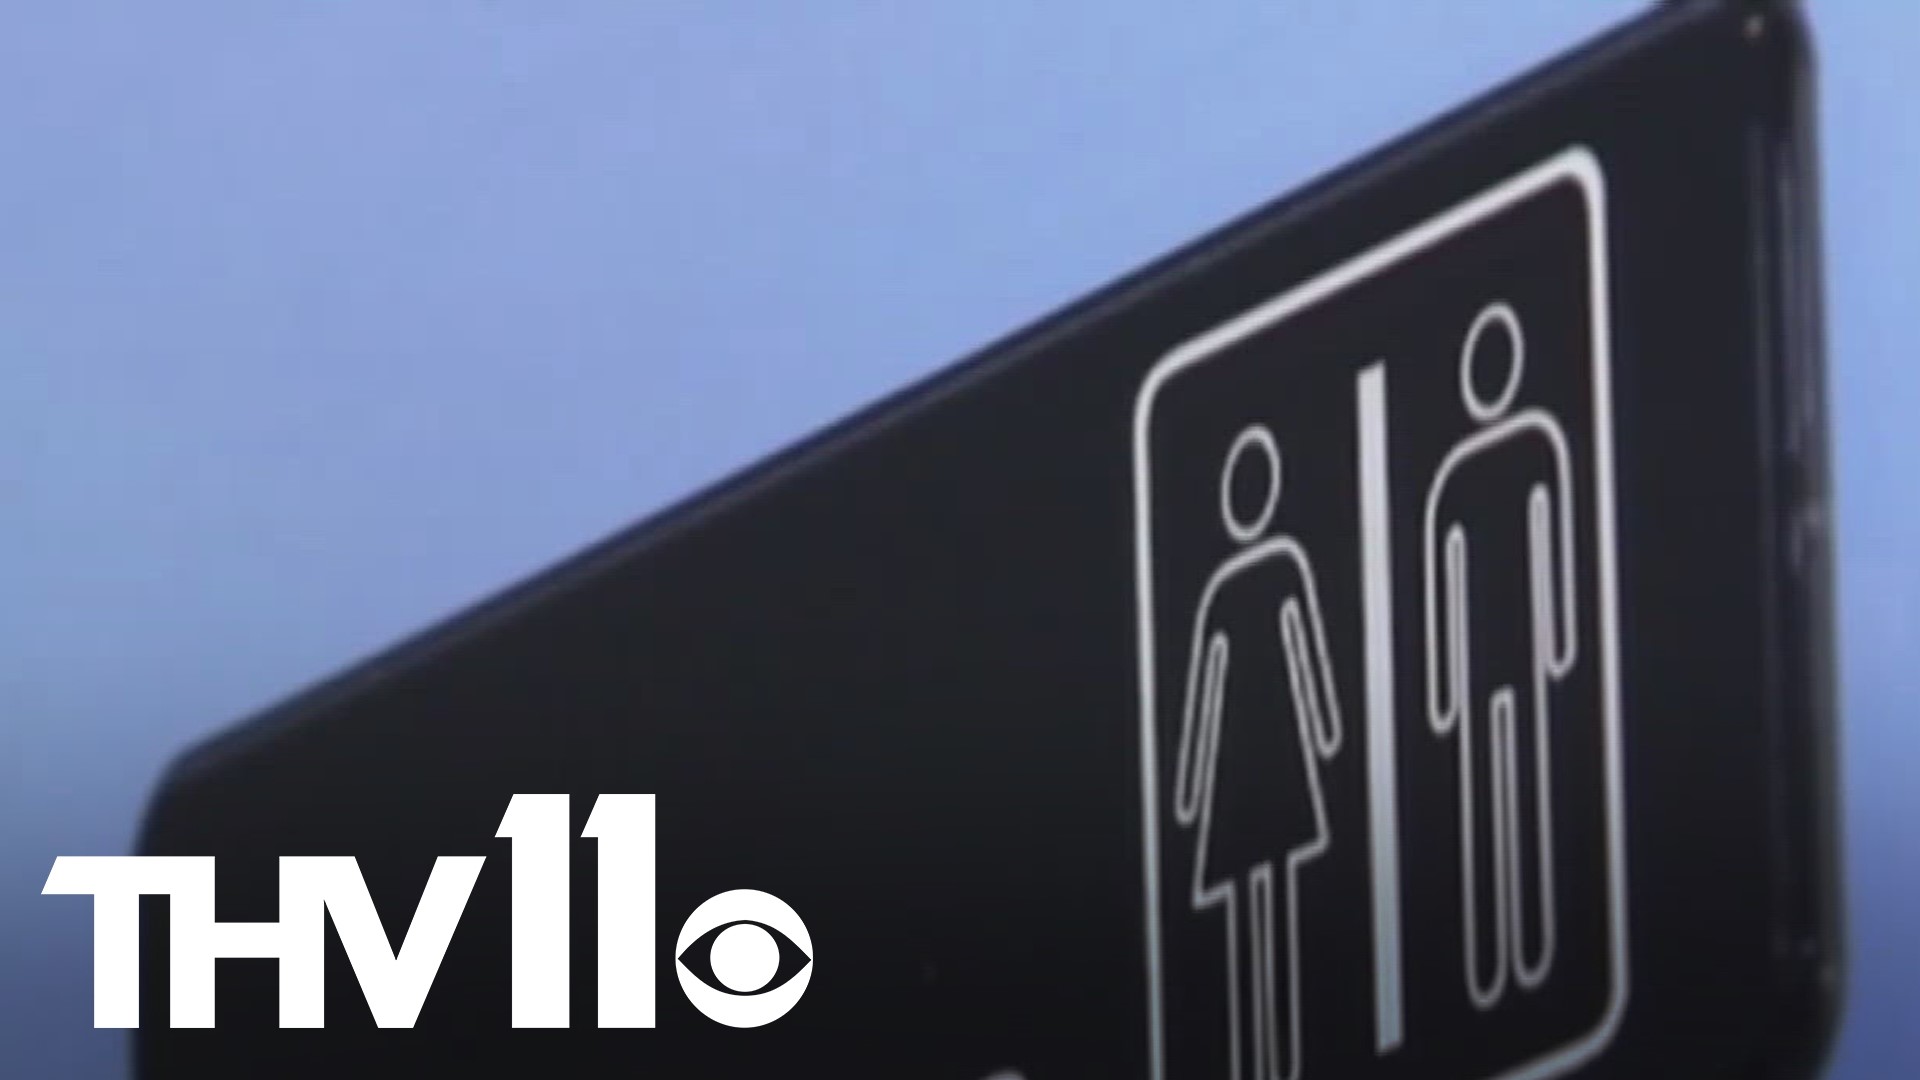 Senate Bill 270 passed through the Senate on Tuesday. It would criminalize those who knowingly stay inside restrooms with a child of the opposite biological sex.